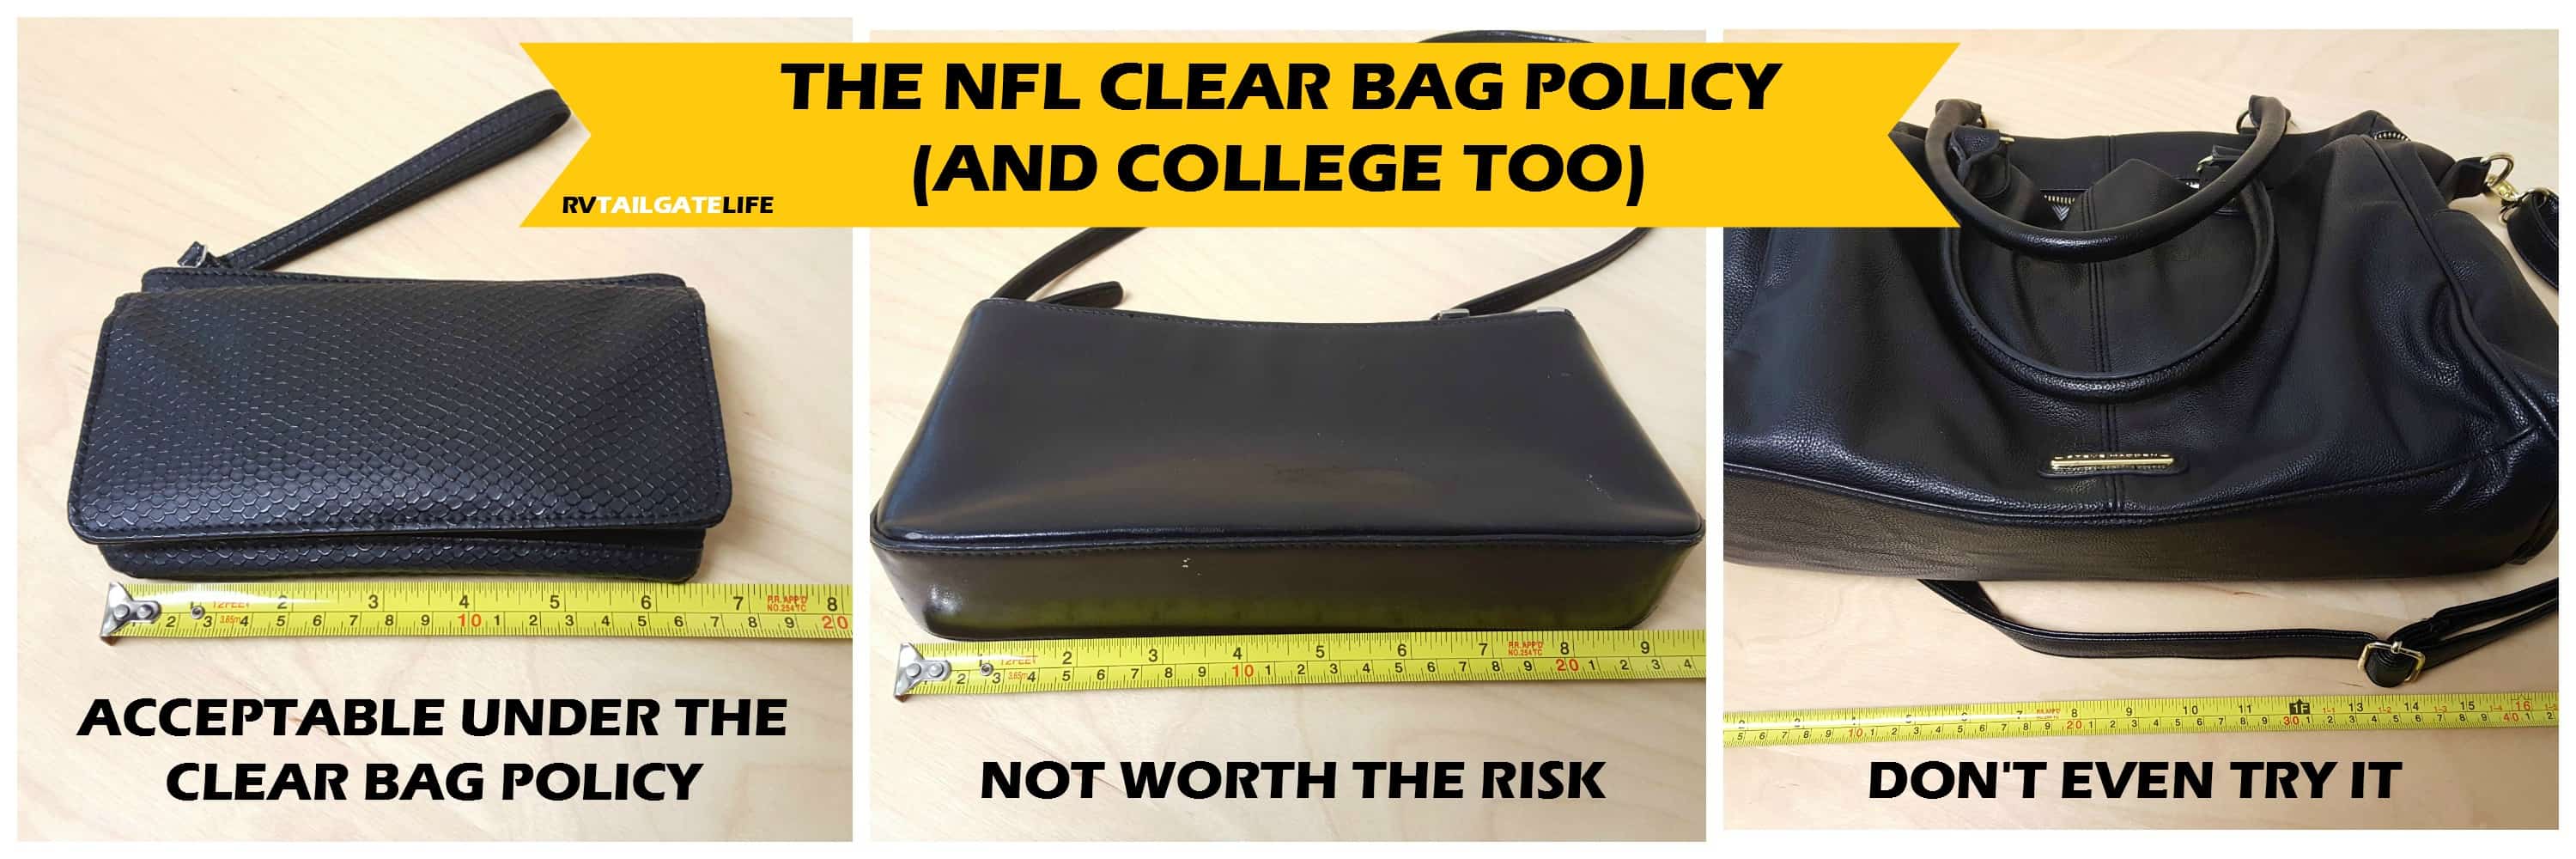 NFL bag policy: League reduces the size of non-transparent bags